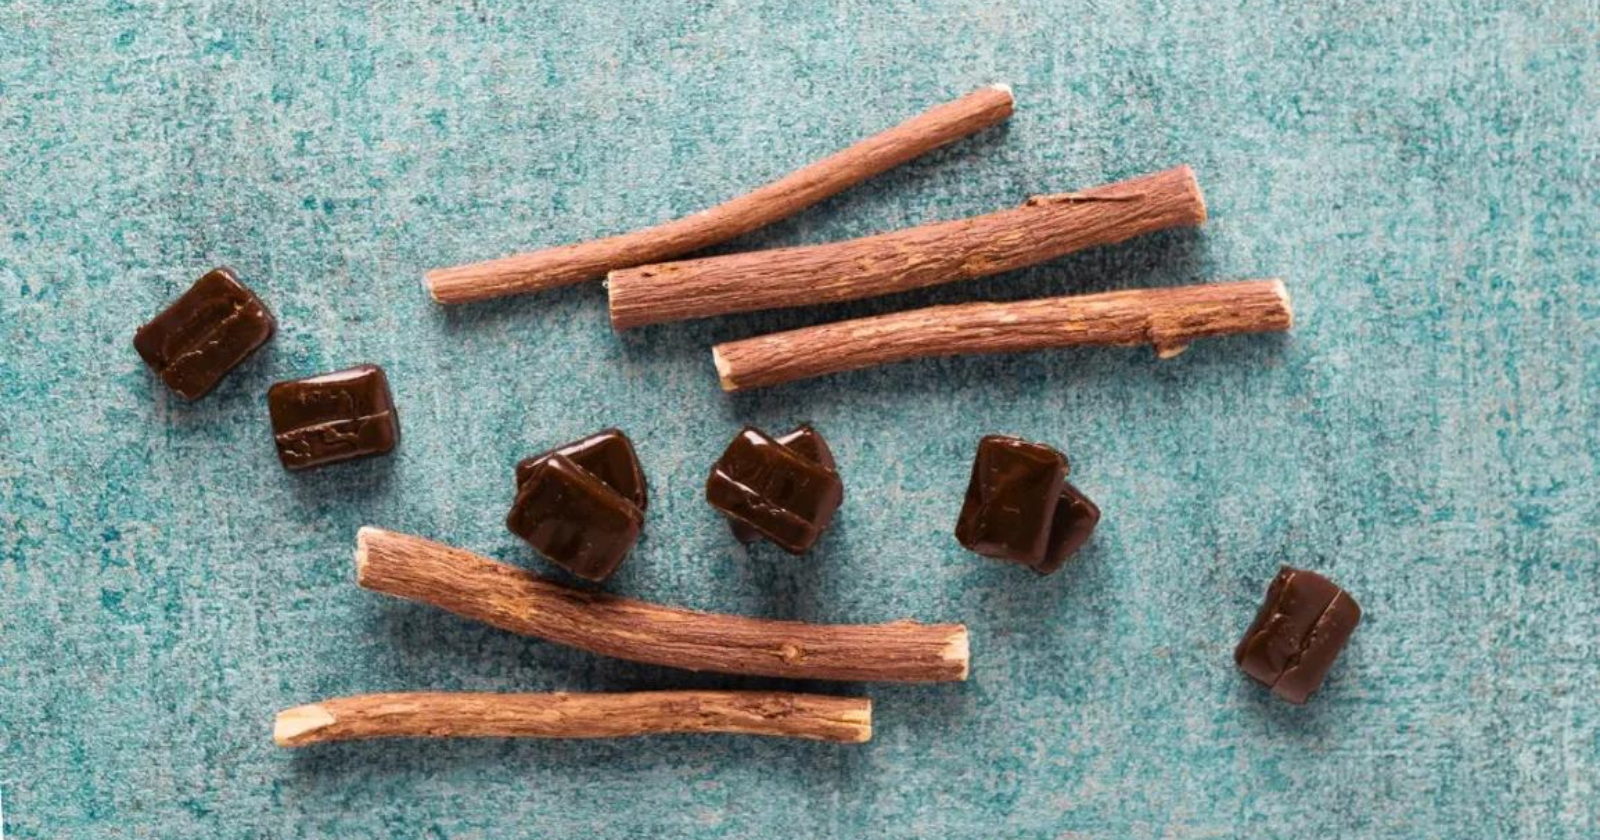 Licorice Root (Ayurvedic Medicine): Uses, side effects, and more